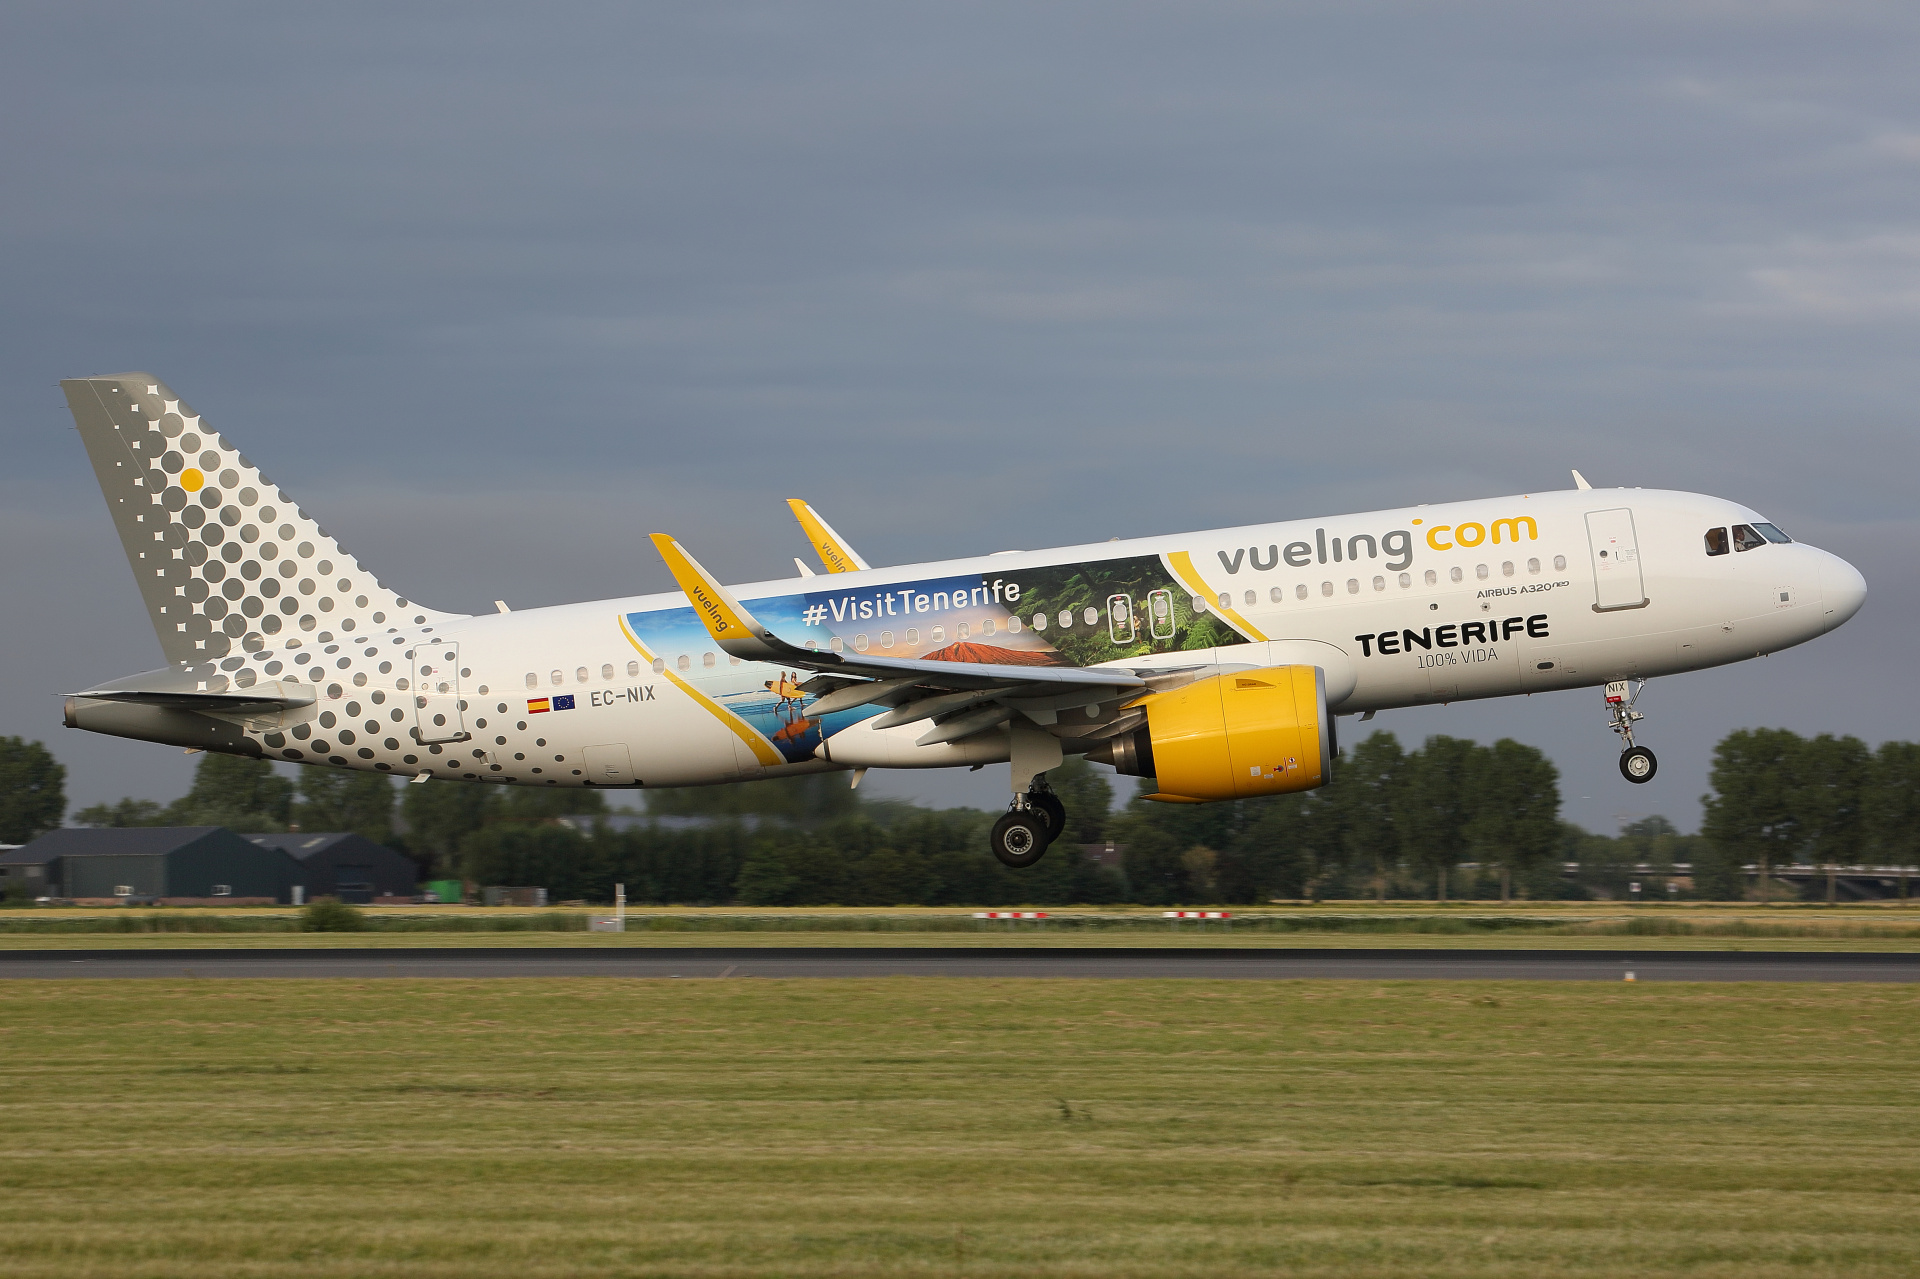 EC-NIX (Tenerife 100% Vida livery) (Aircraft » Schiphol Spotting » Airbus A320neo » Vueling Airlines)